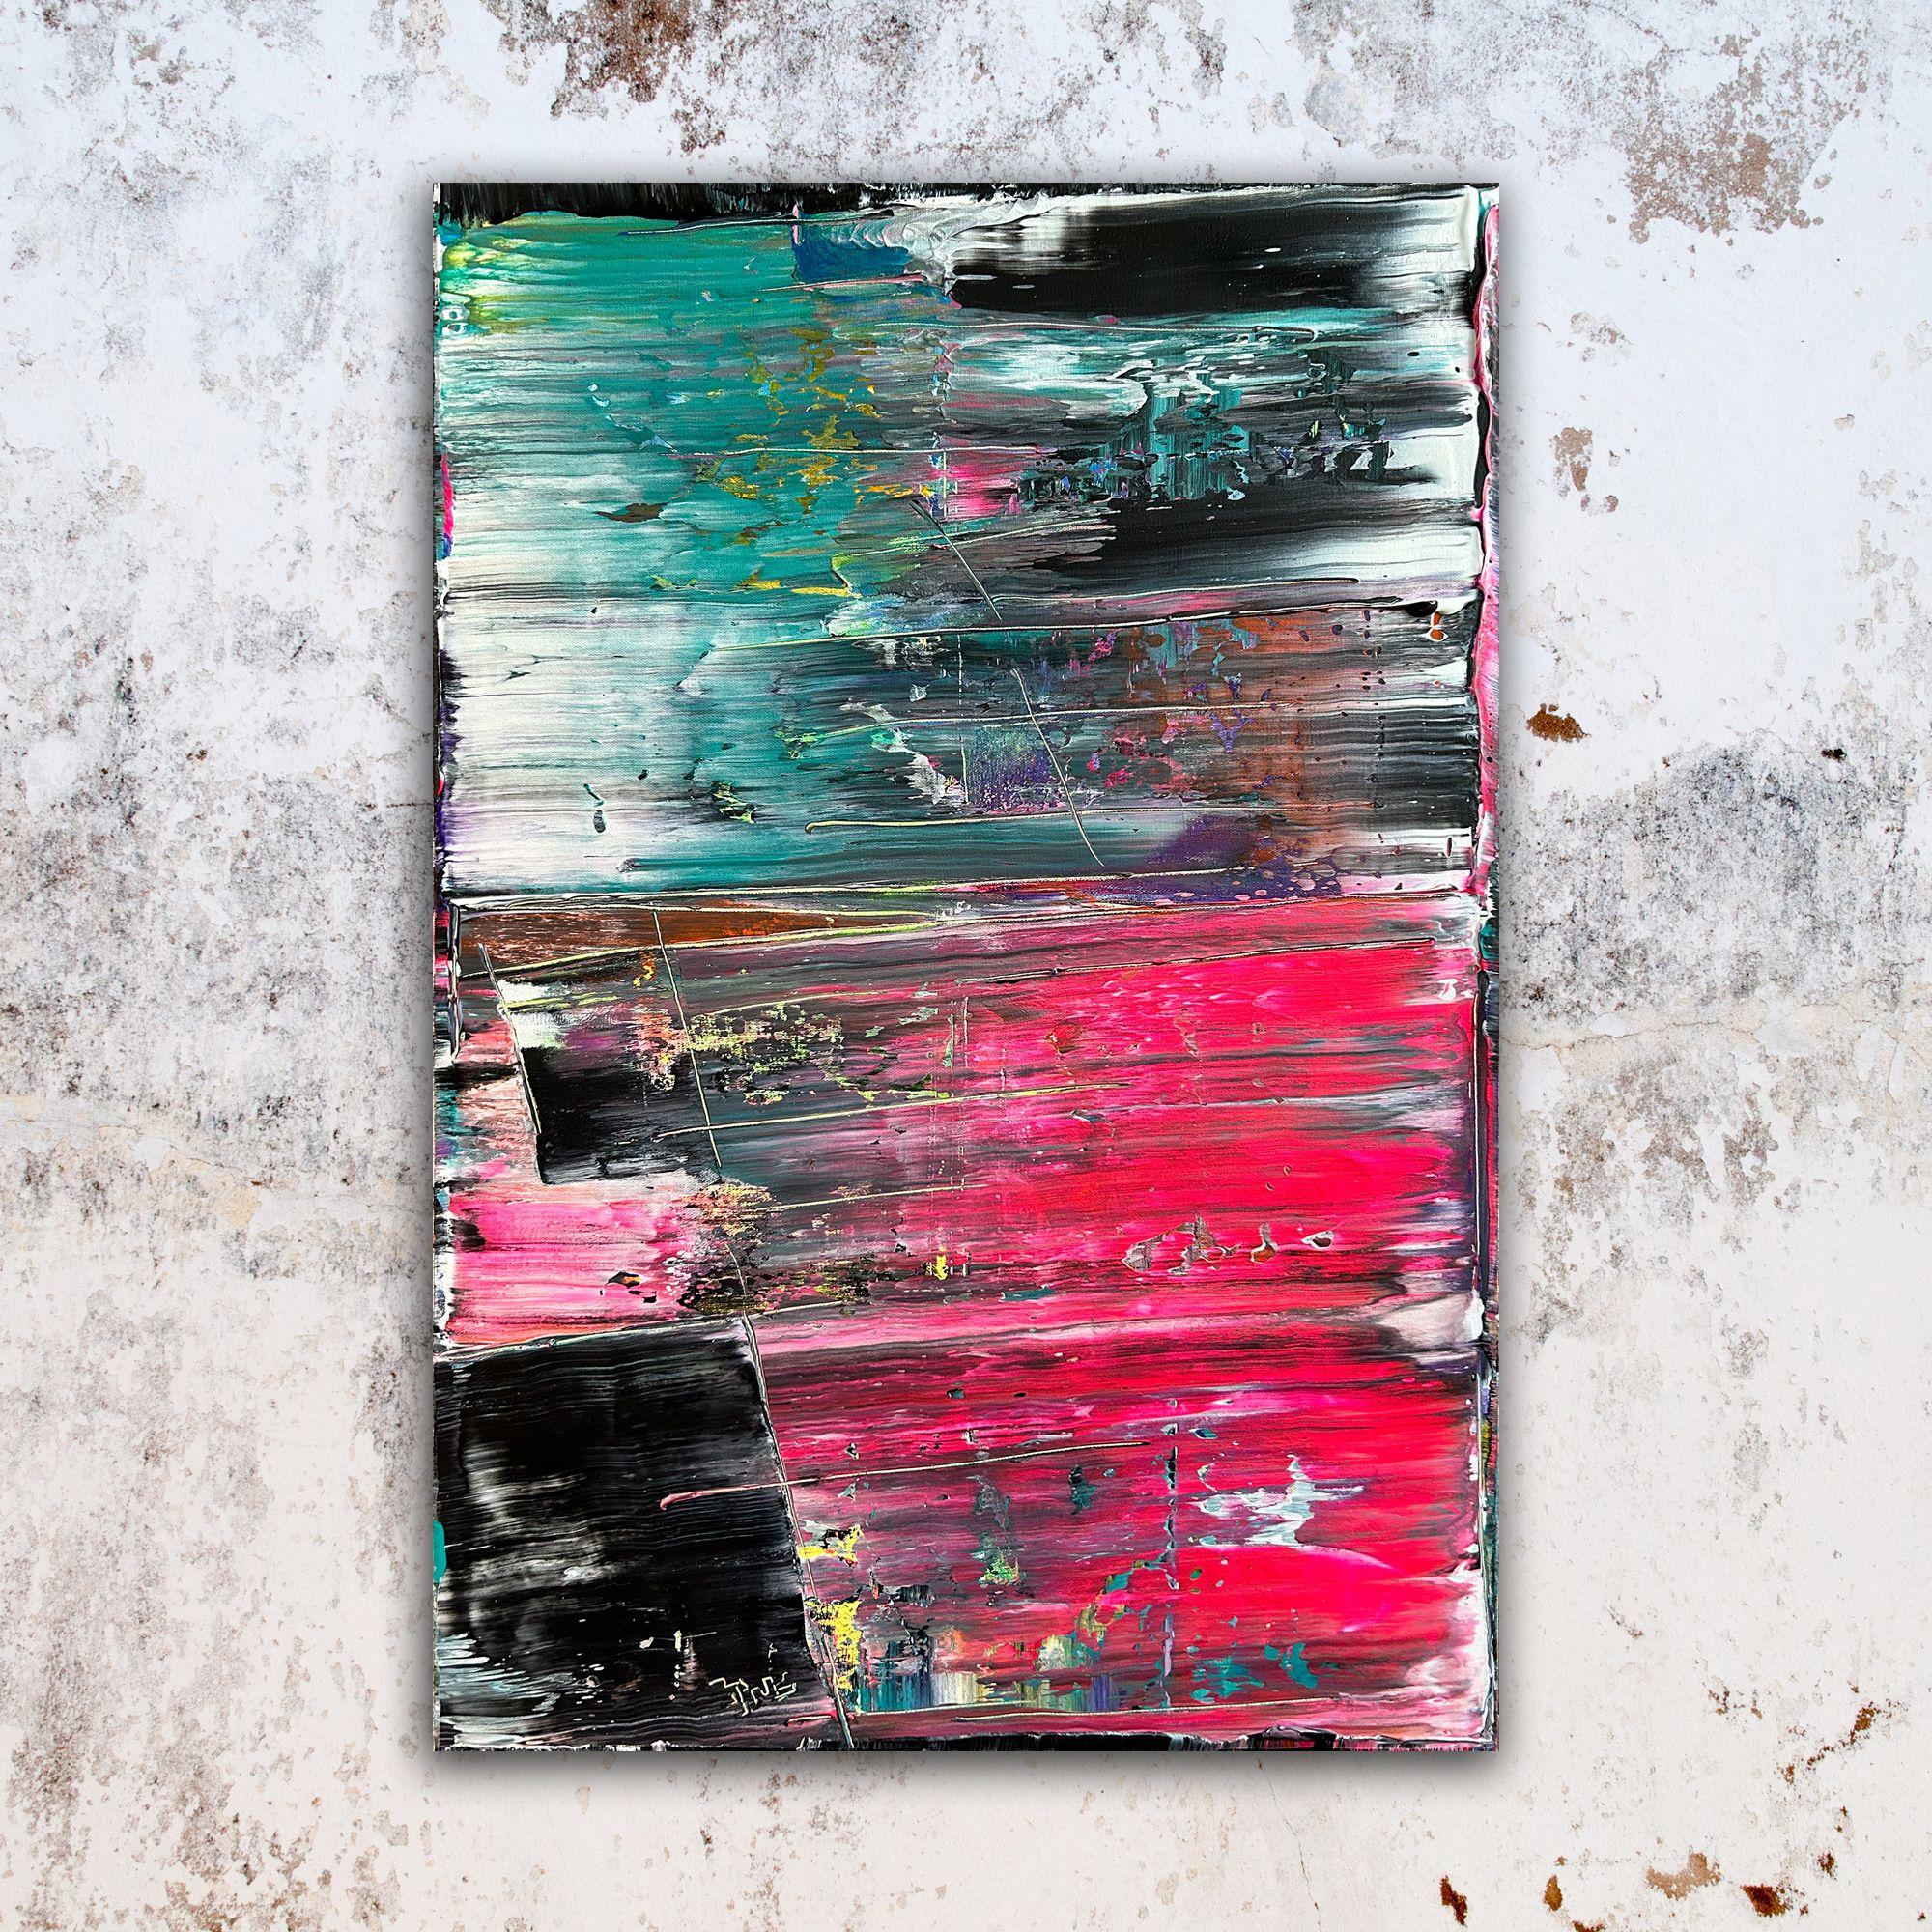 This is a unique modern PMS abstract acrylic painting that will make a statement in your home or office. This piece has a mature, beautiful and dark neutral modern design aesthetic. This painting is full of emotion, pain and hope. It juxtaposes